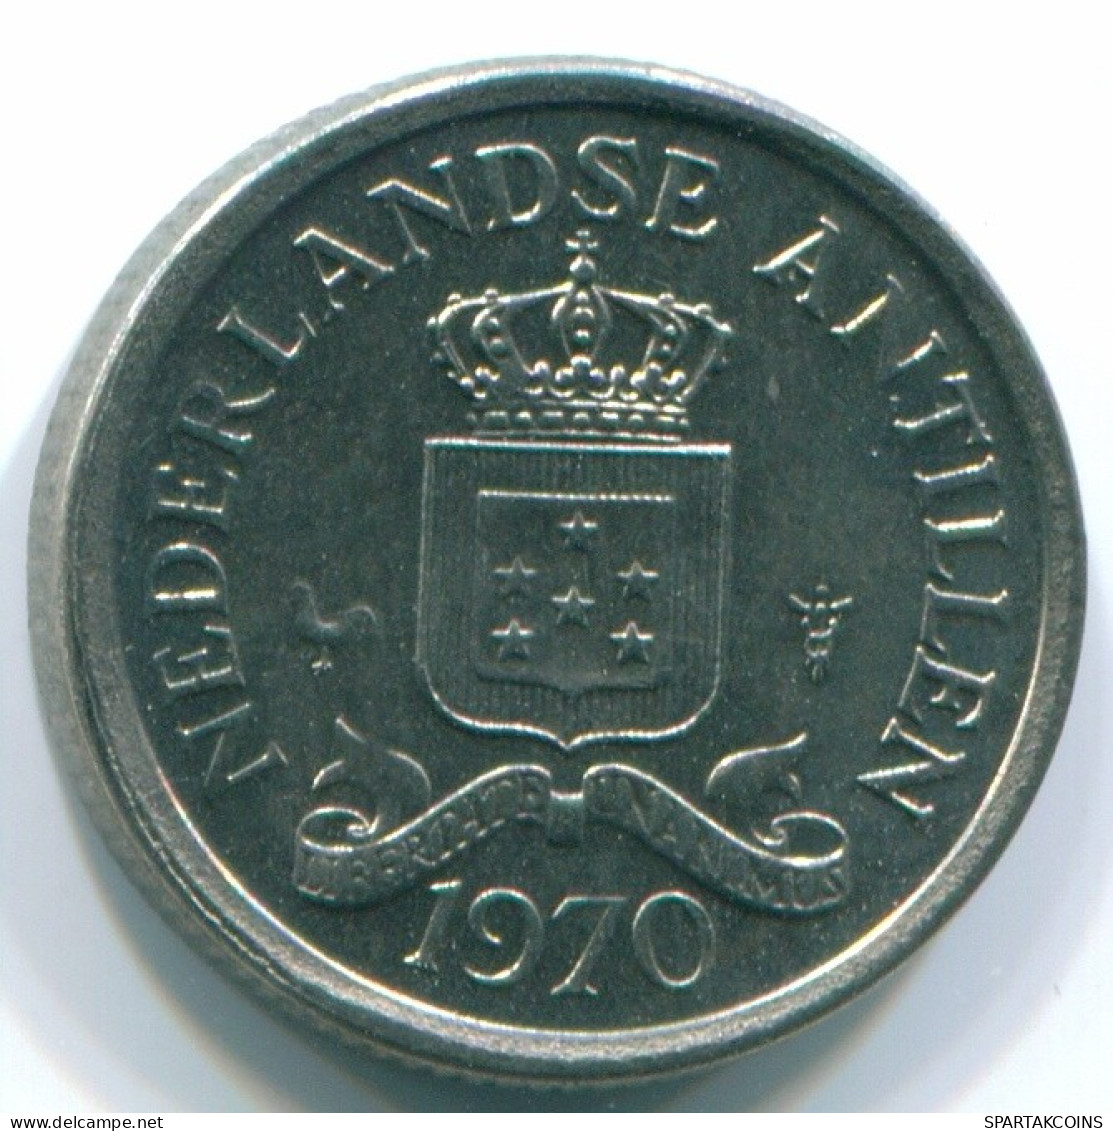 10 CENTS 1970 NETHERLANDS ANTILLES Nickel Colonial Coin #S13340.U.A - Antille Olandesi